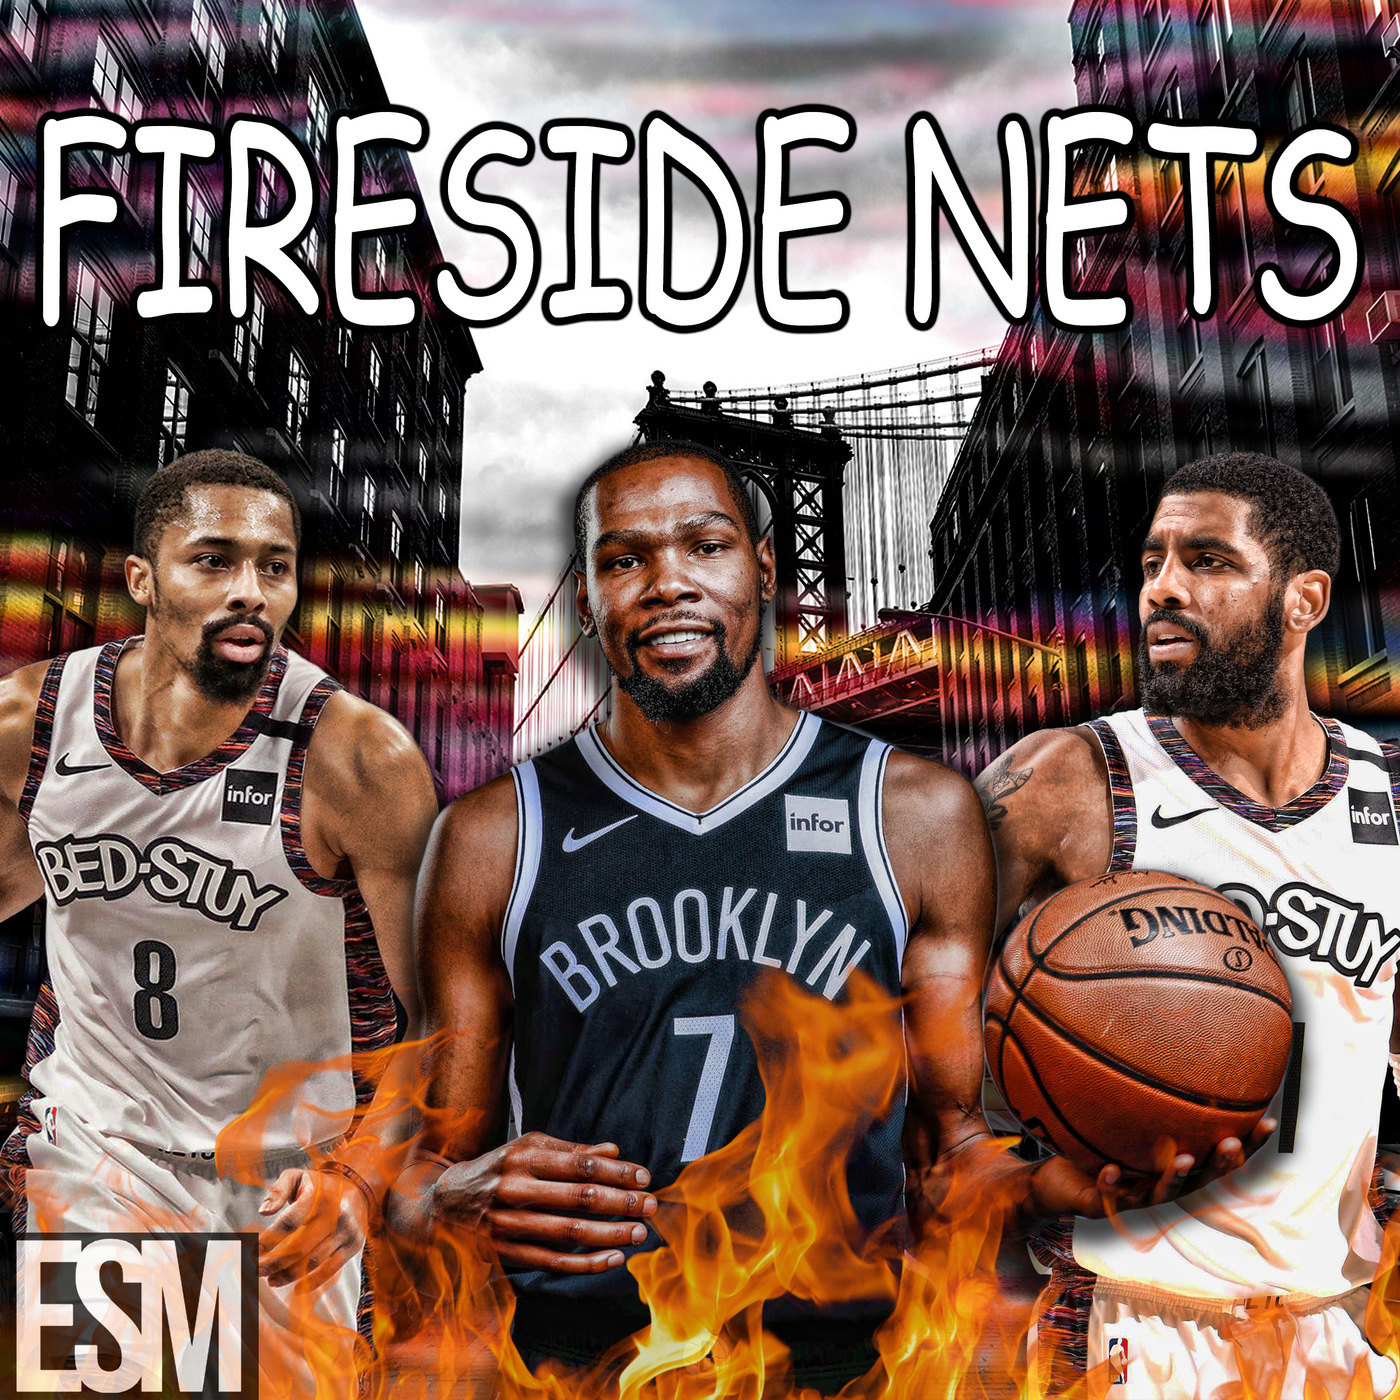 Fireside Nets - The Trade Deadline is Upon Us